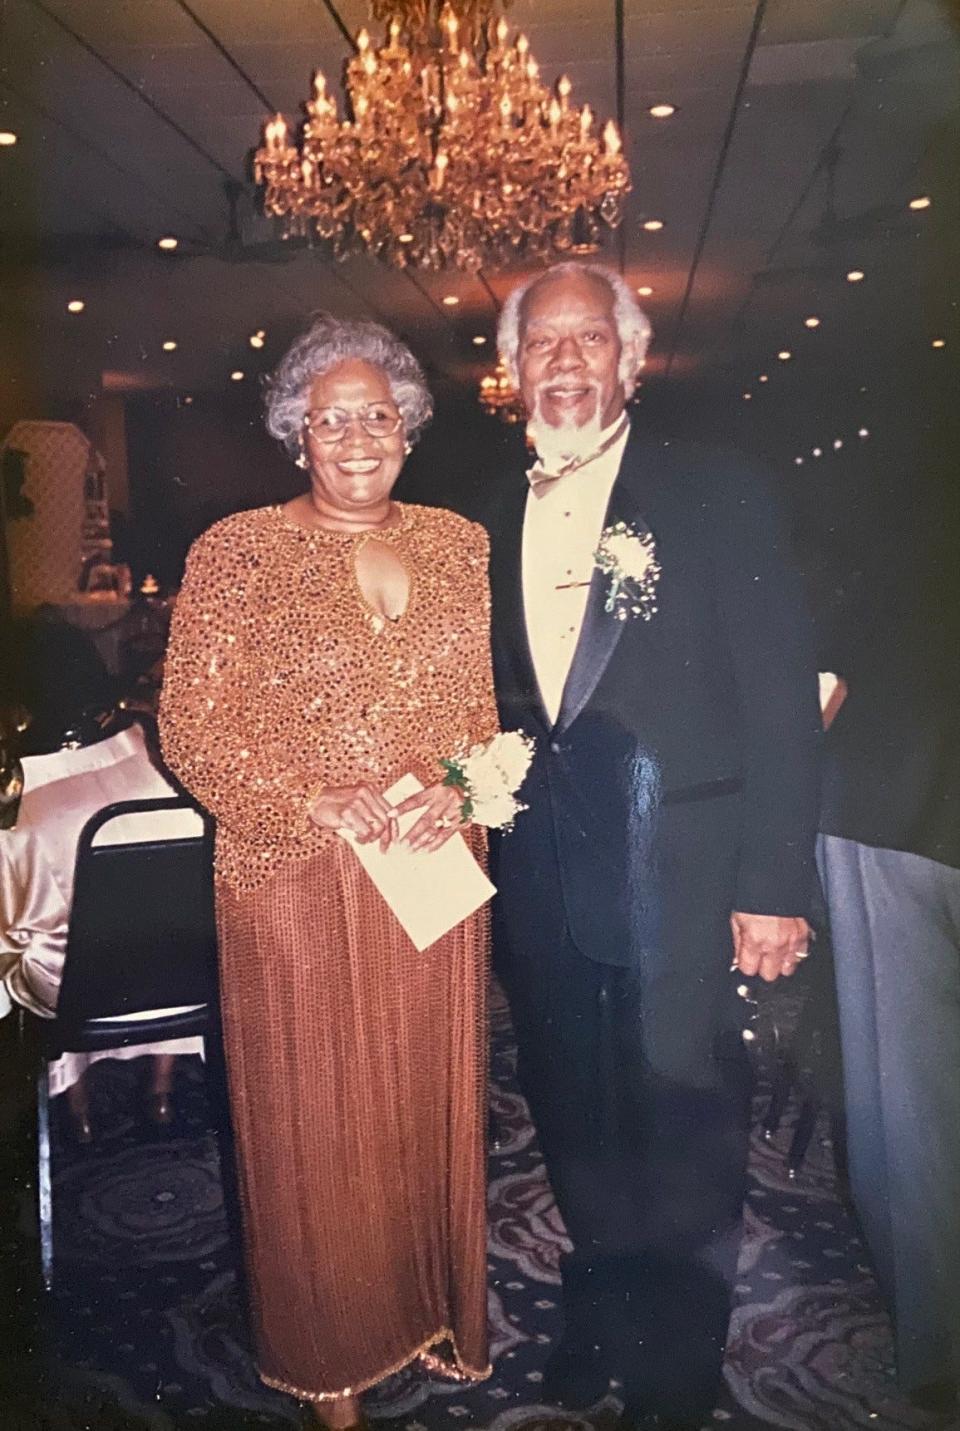 As husband and wife, Thomas and Nellie Bostick were an inseparable pair, their children said. Here, in 1997, they celebrated their 50th wedding anniversary at the Mapledale Party House. In total, they reached 76 years of marriage.